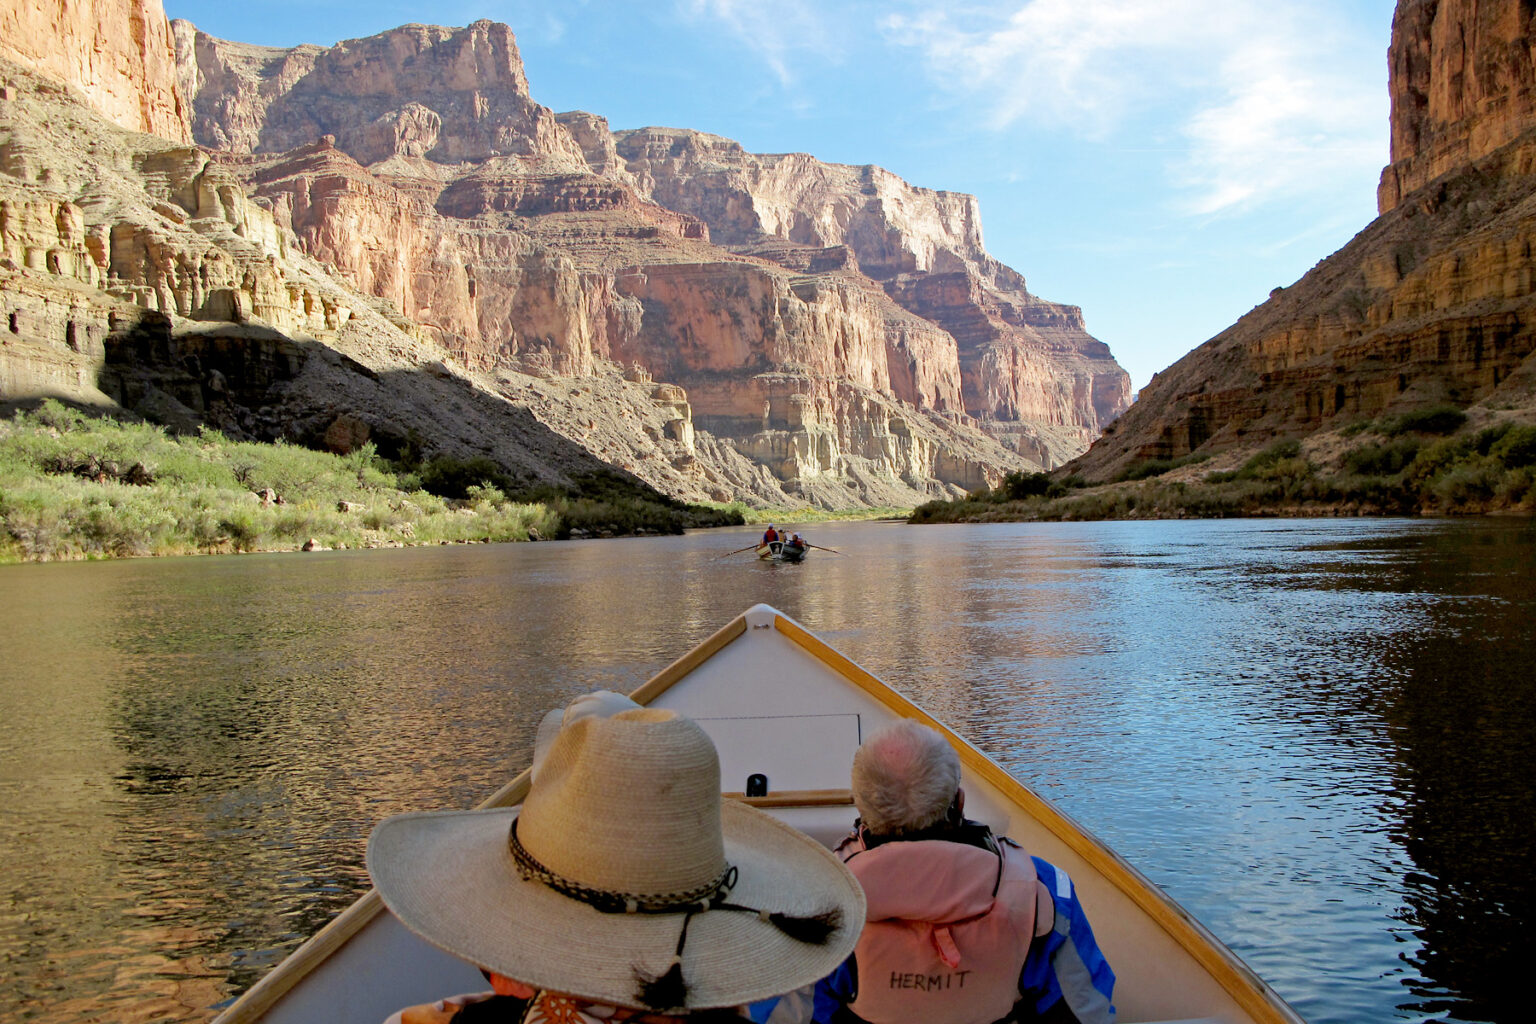 Colorado River looking like a lake with OARS dories rowing towards sunlit cliffs in Grand Canyon